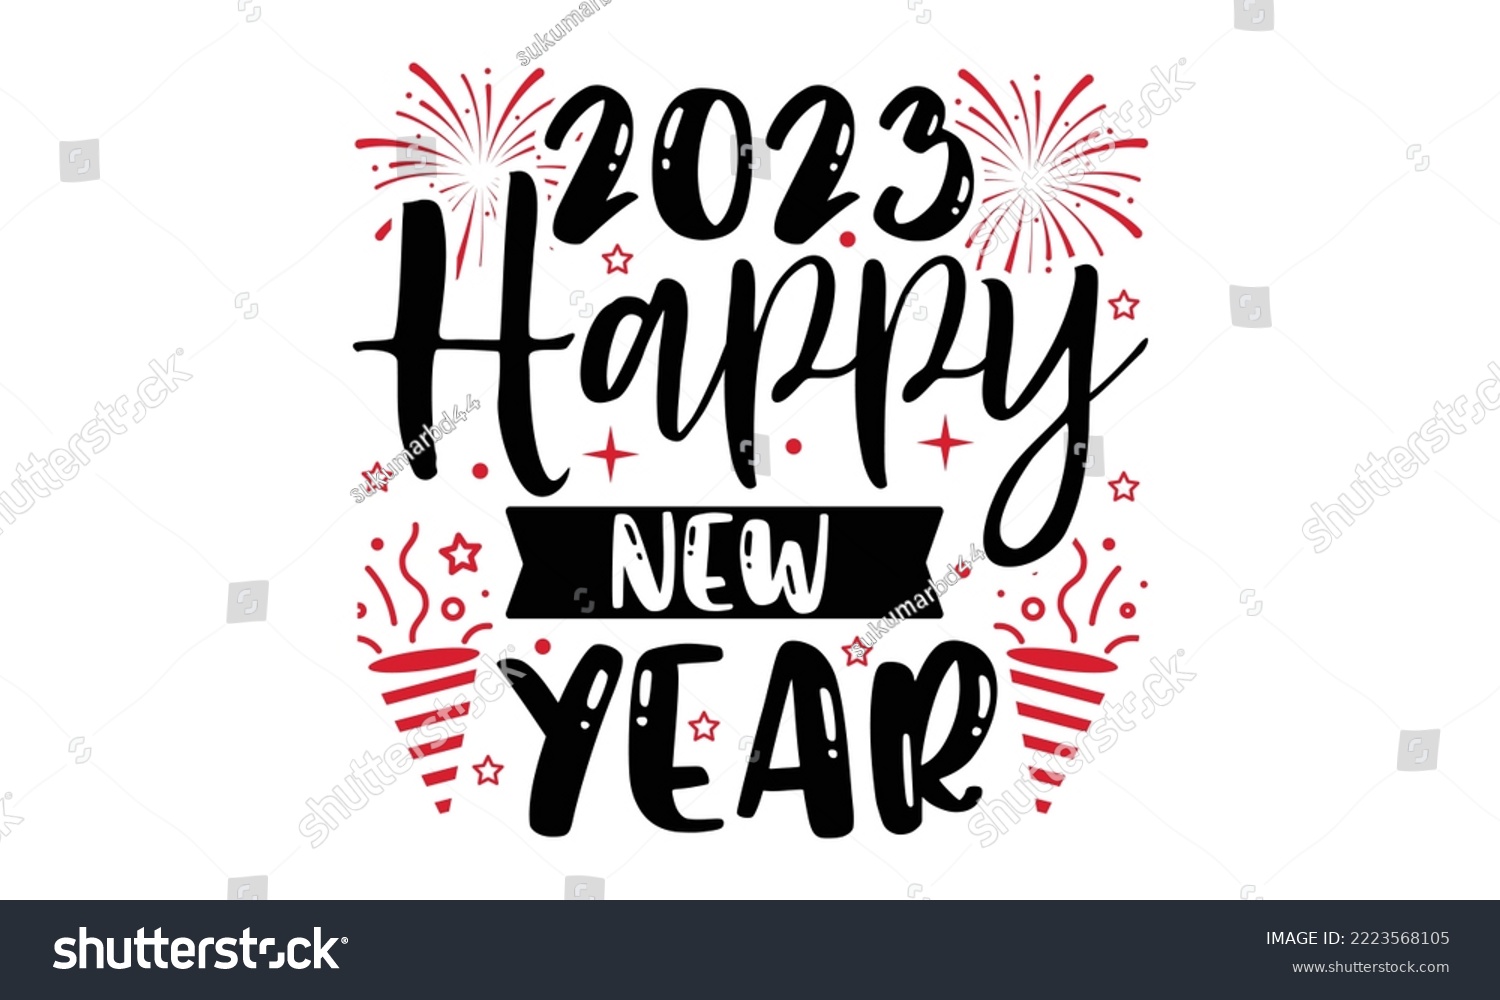 SVG of 2023 Happy New Year - Happy New Year SVG Design, Hand drawn lettering phrase isolated on white background, Calligraphy T-shirt design, EPS, SVG Files for Cutting, bag, cups, card svg